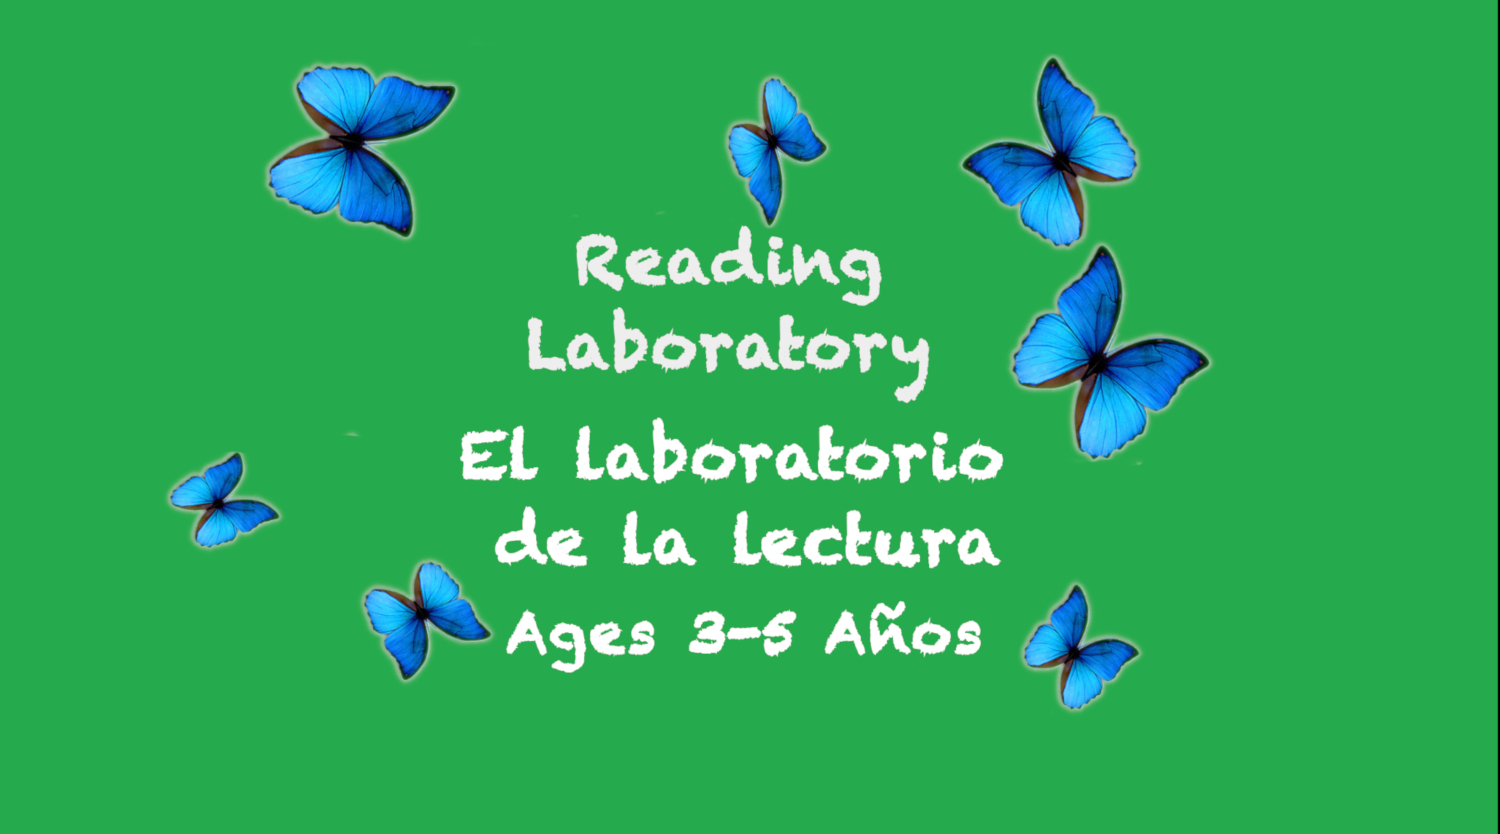 Reading Laboratory for 3-5 year olds